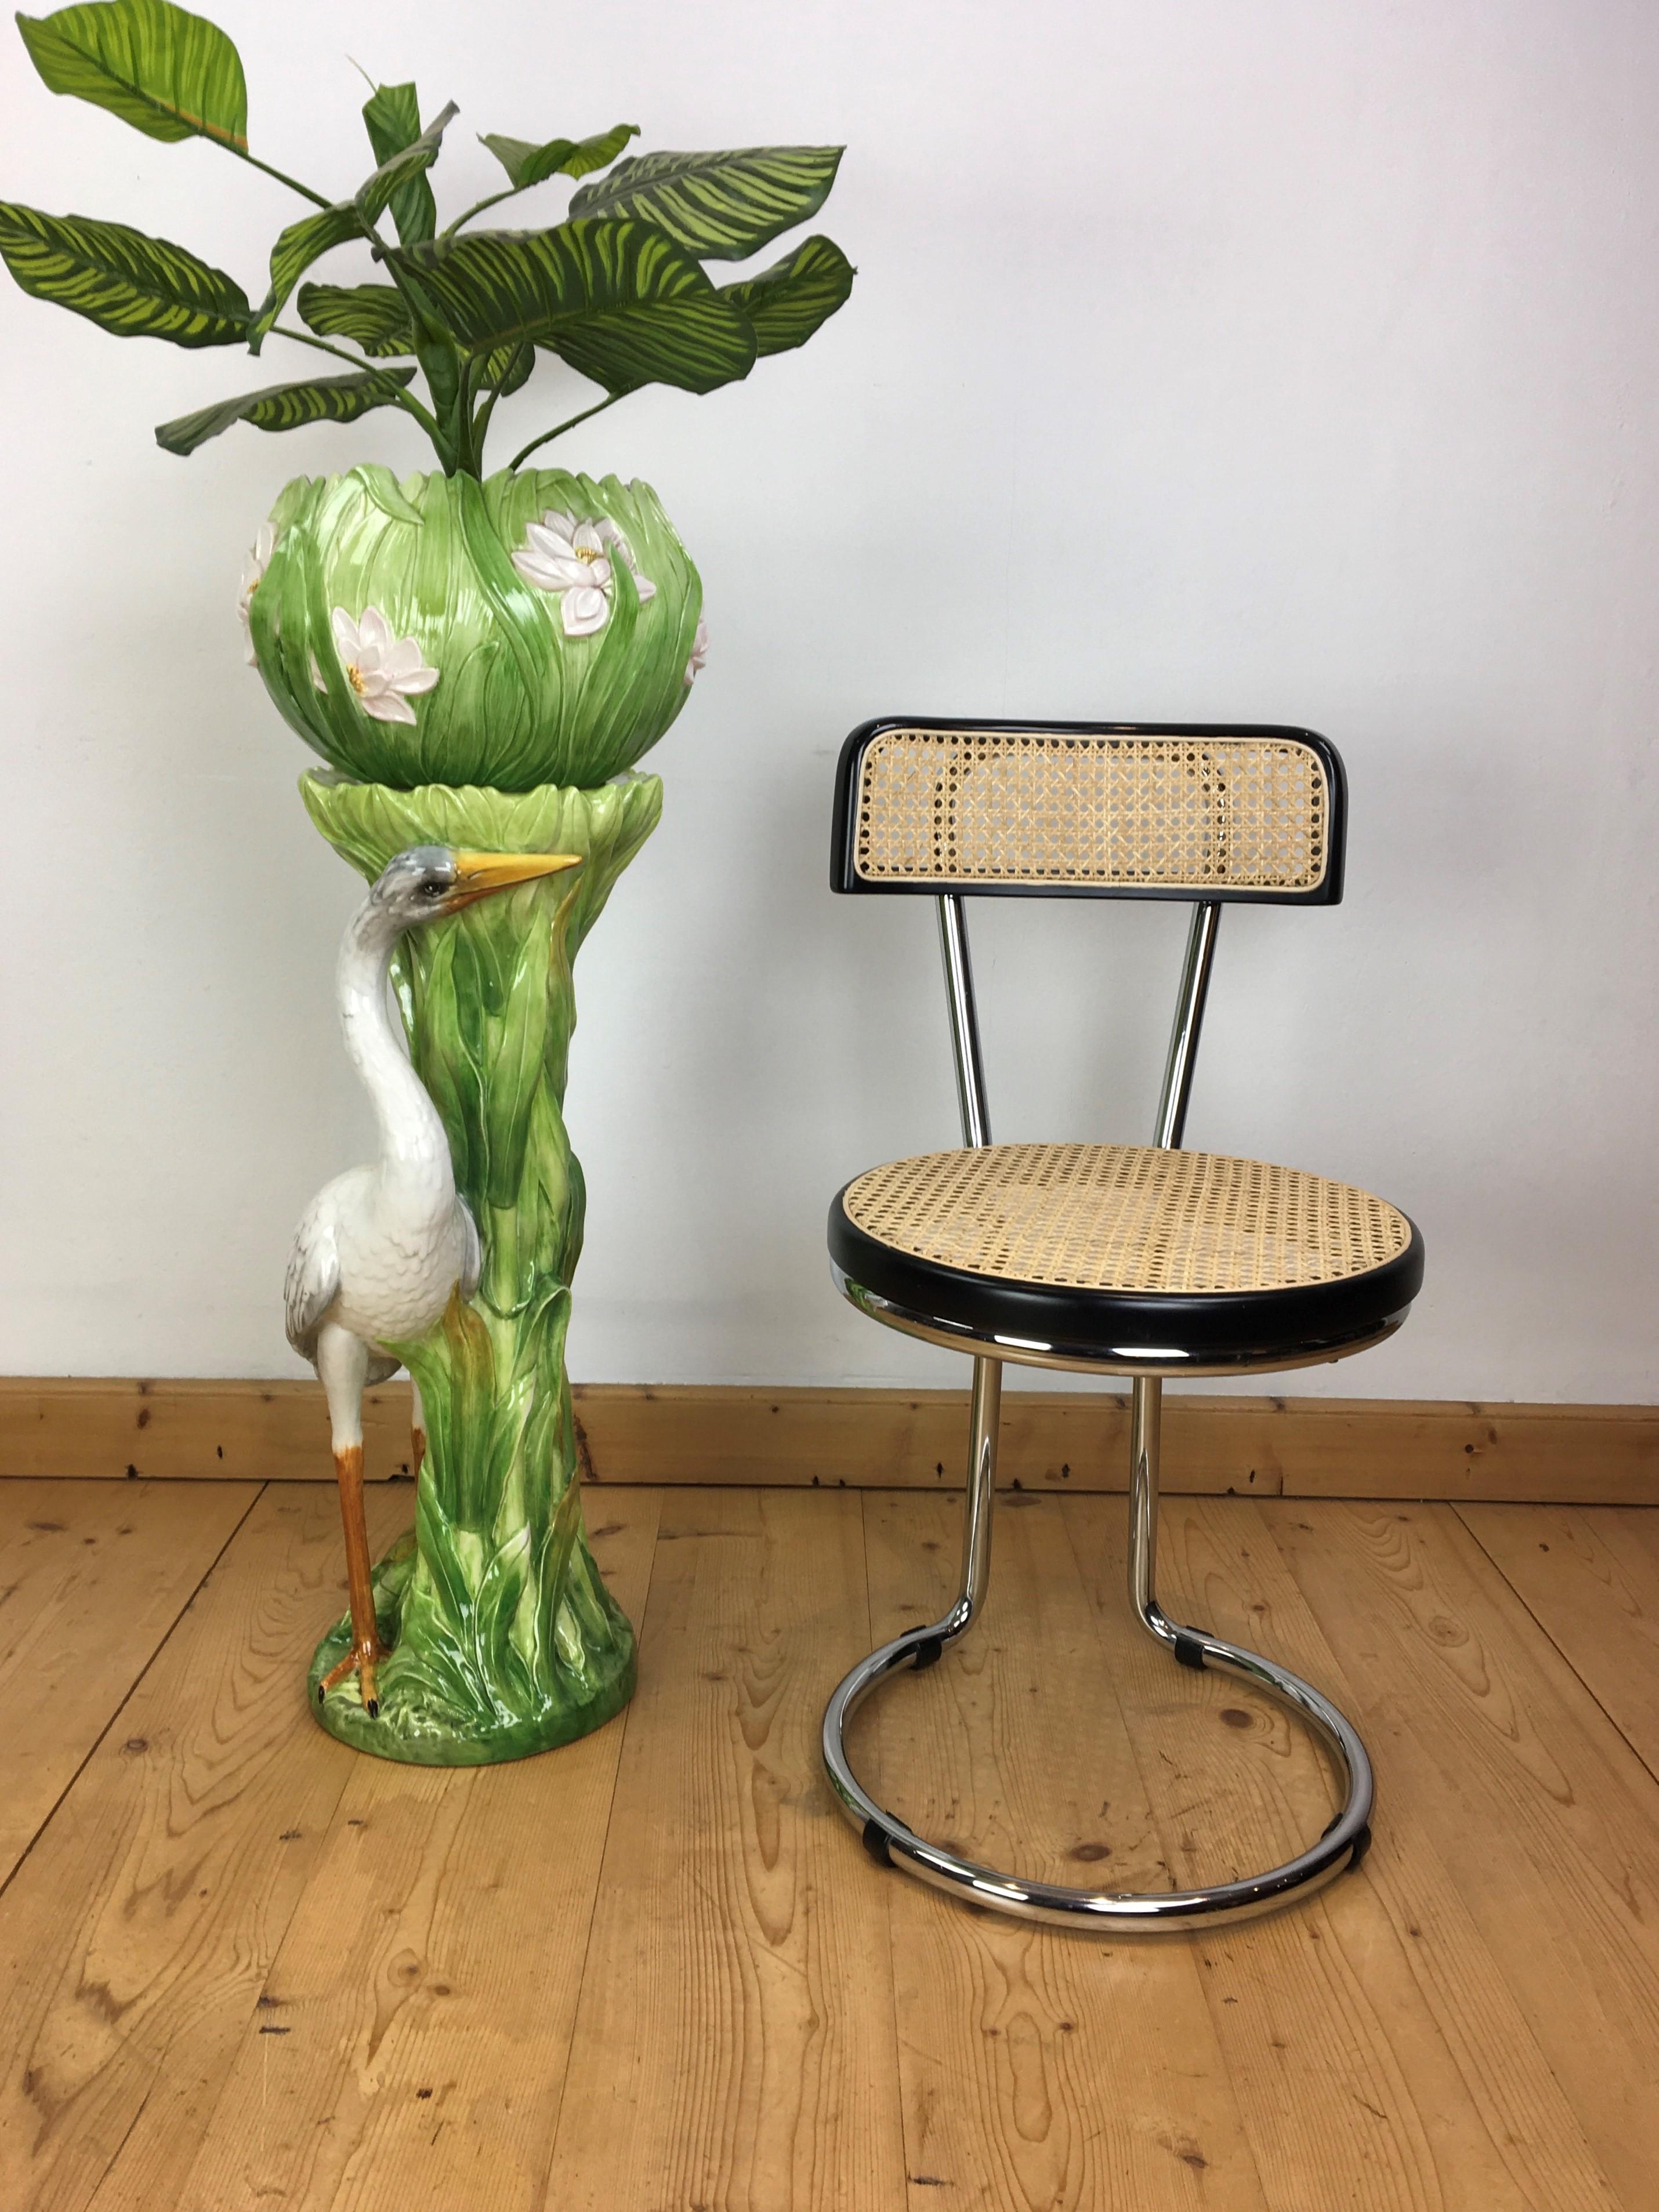 Great looking column with a heron bird and planter on top. 
The column or stand has lots of leaves and a heron bird around. 
The vase or jardinière has beautiful flowers. 
This ceramic planter and stand has beautiful green colors with the flowers